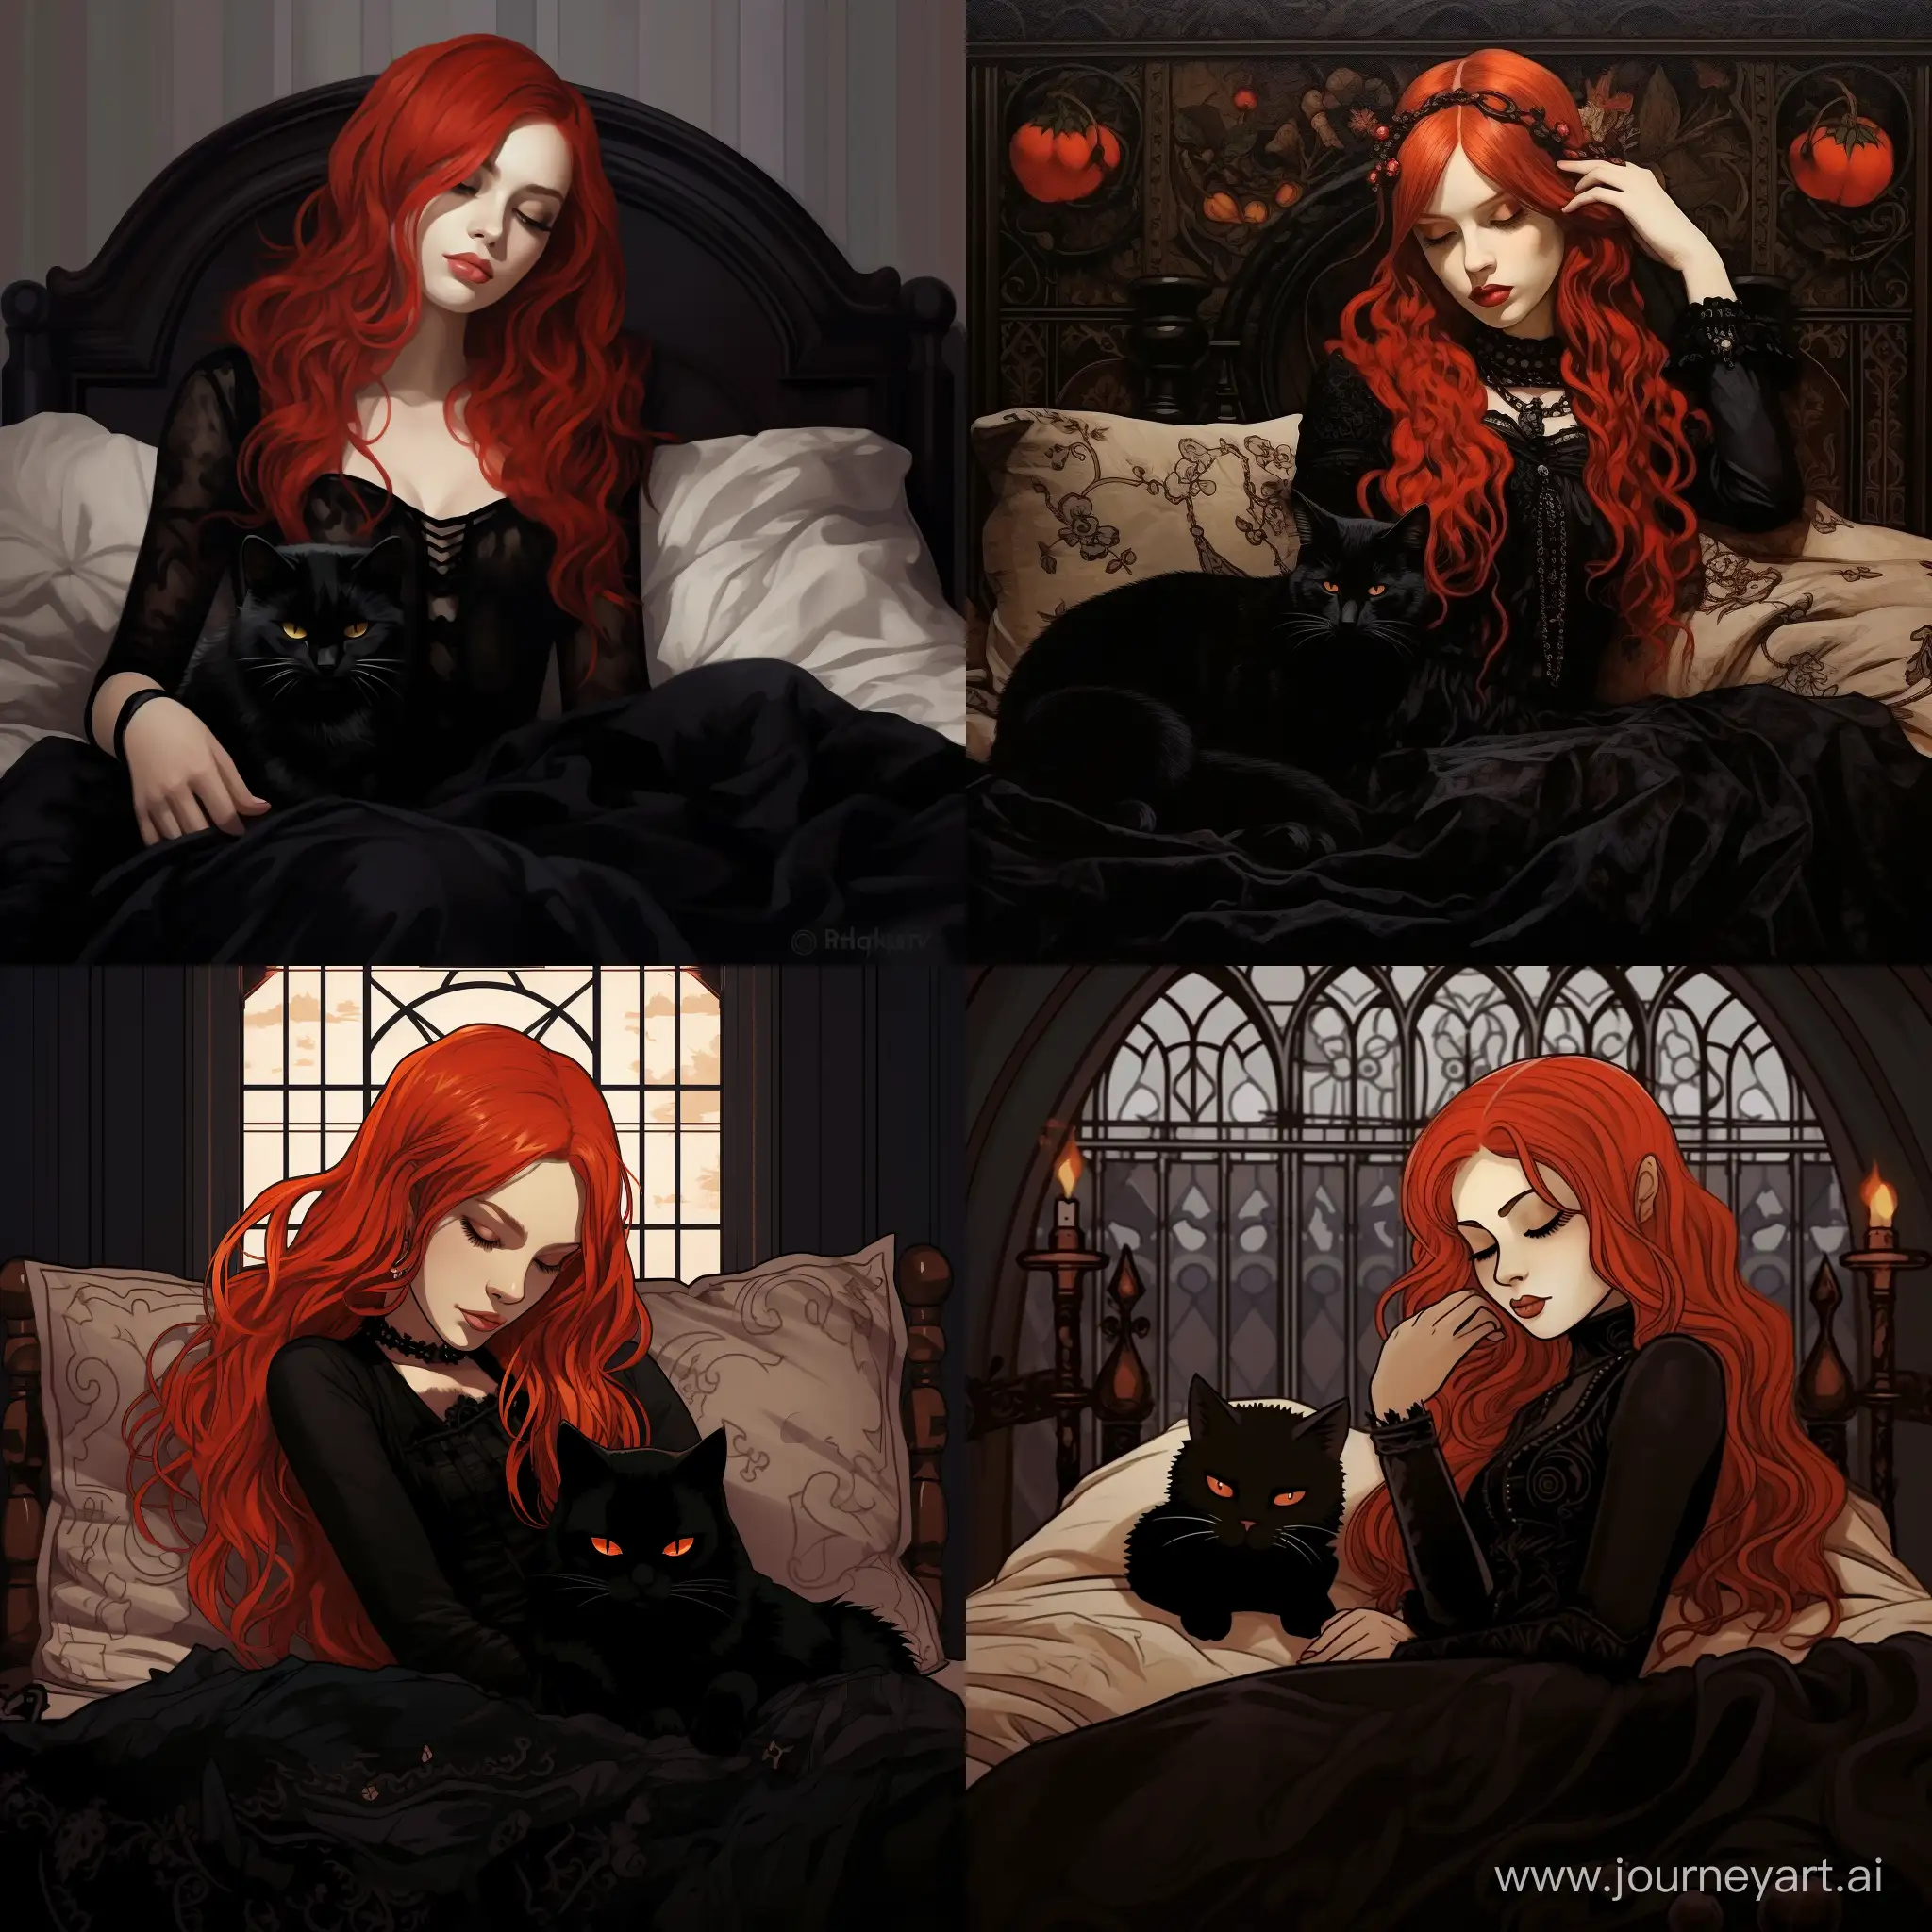 Enchanting-Slumber-RedHaired-Gothic-Girl-and-Cat-in-Gothic-Setting